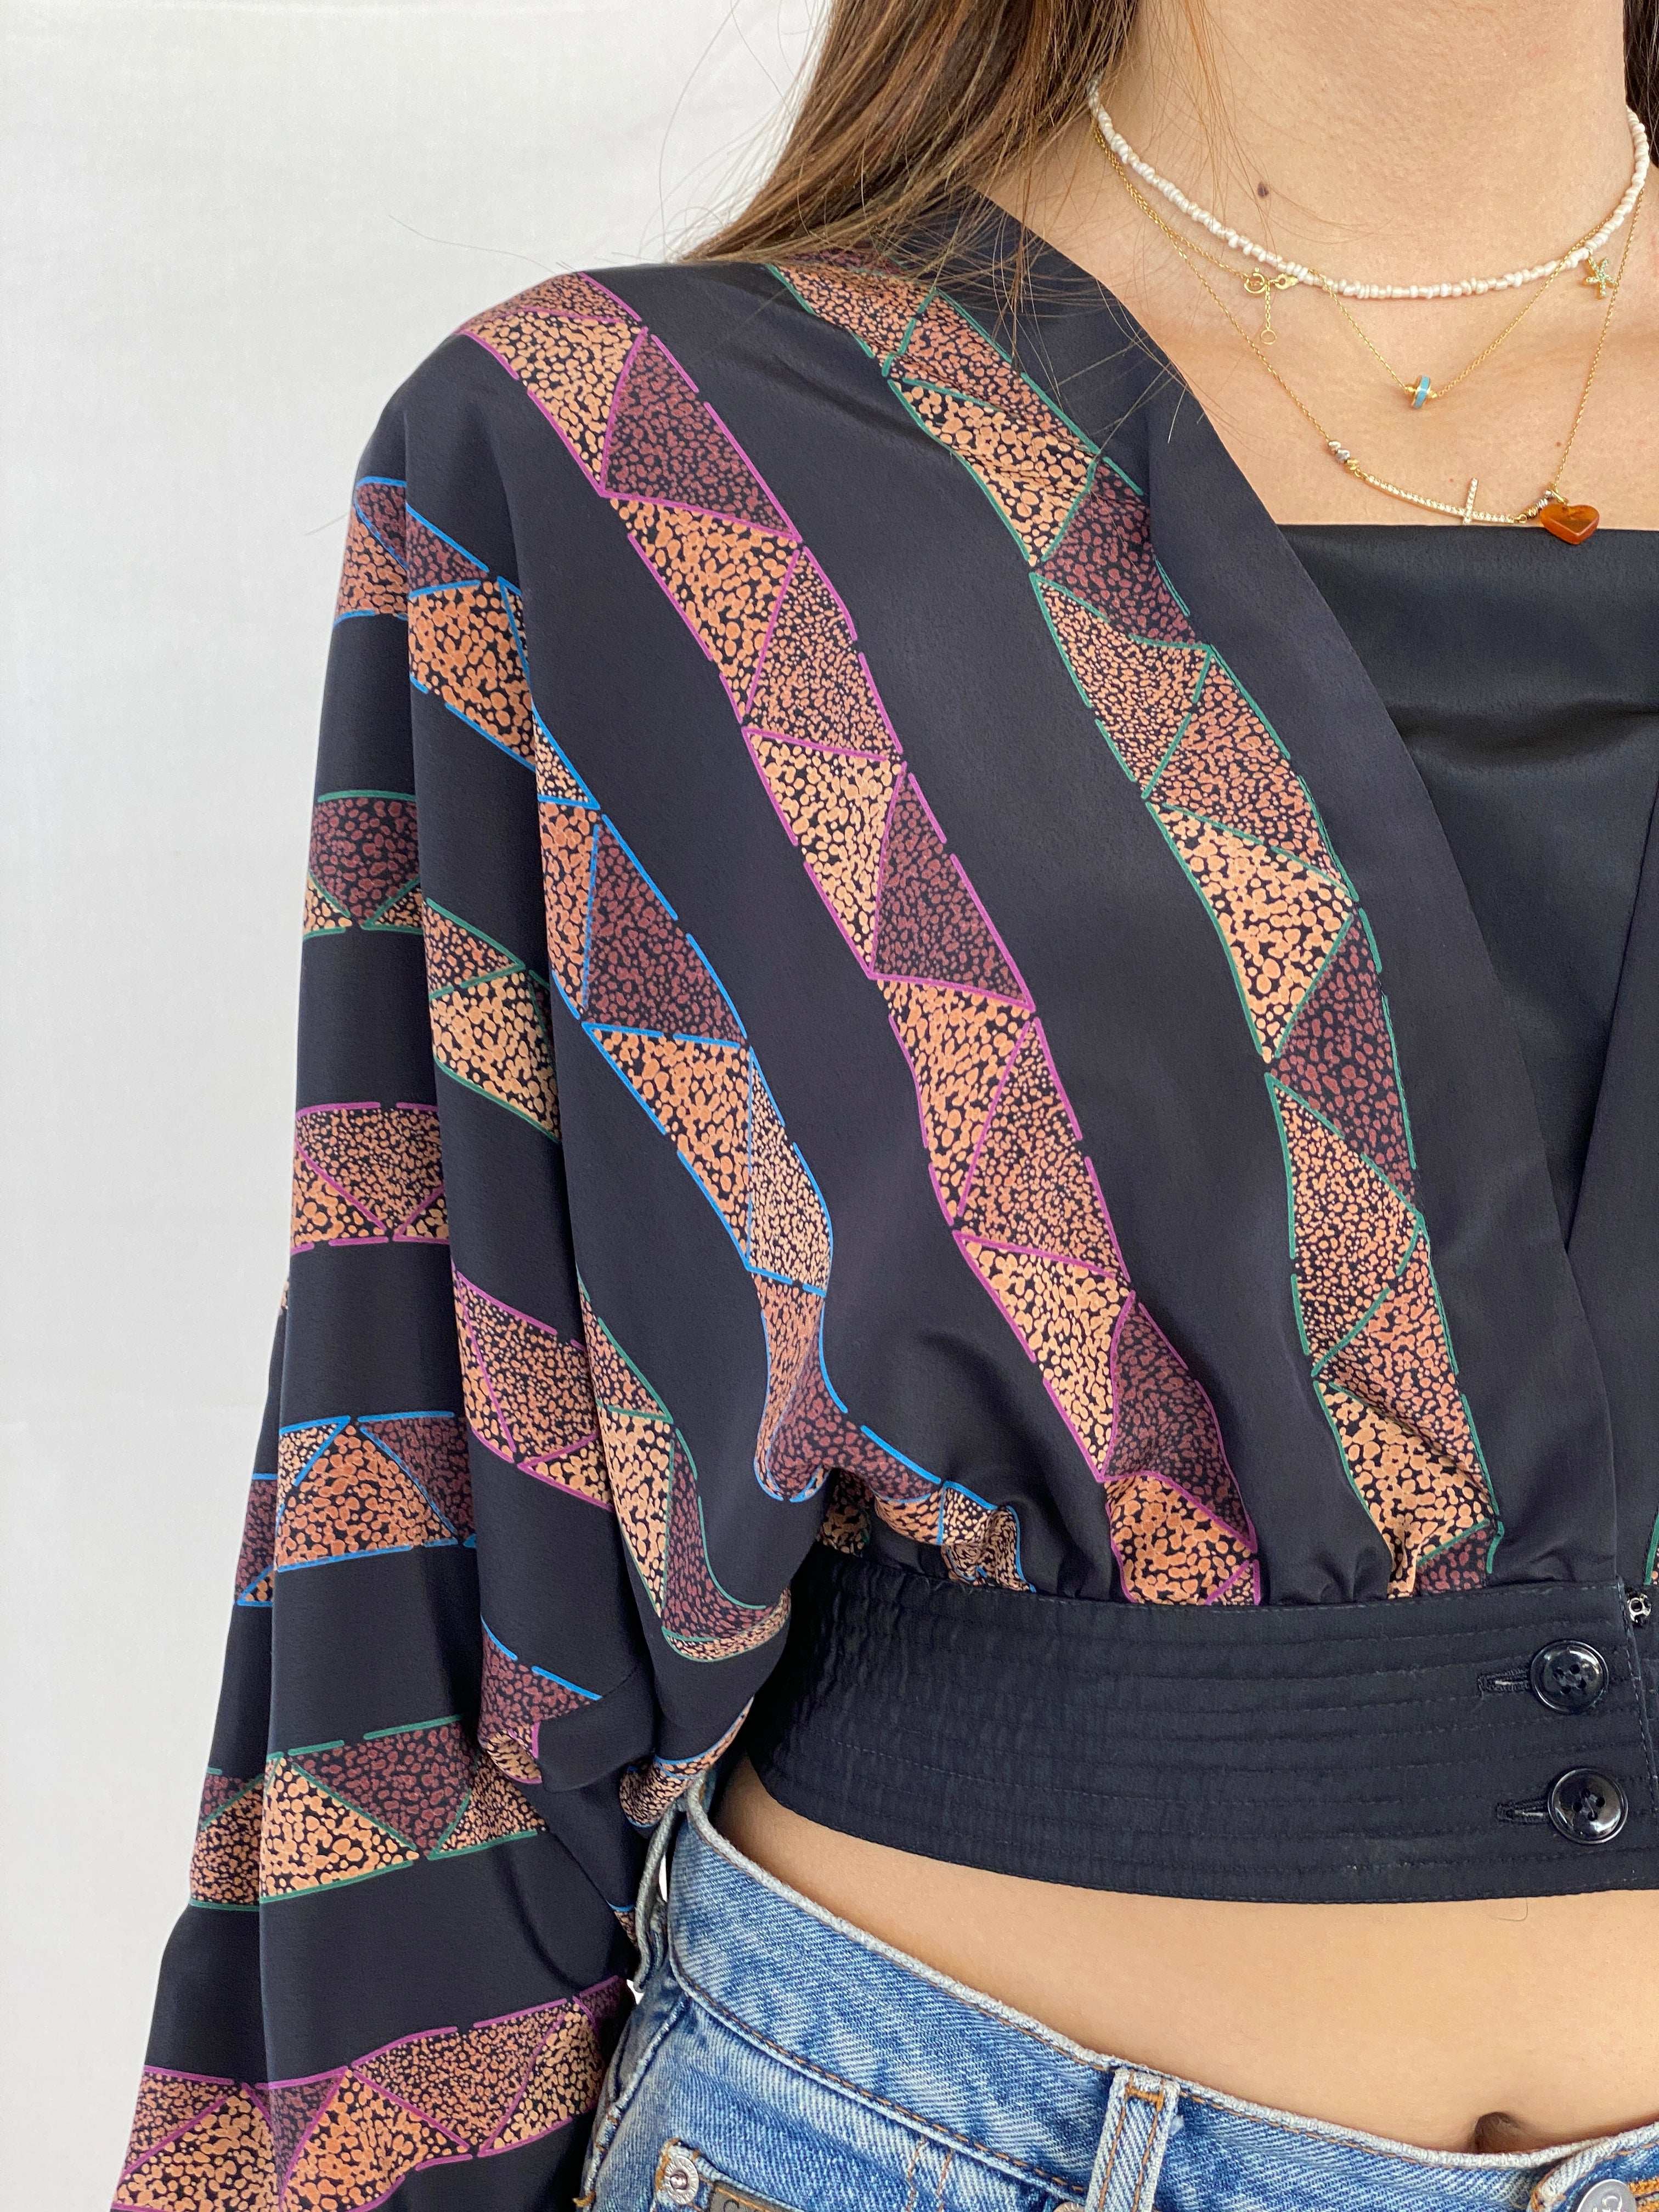 Vintage 90s Maggy Boutique Top - Balagan Vintage Full Sleeve Top 00s, 90s, full sleeve top, Juana, NEW IN